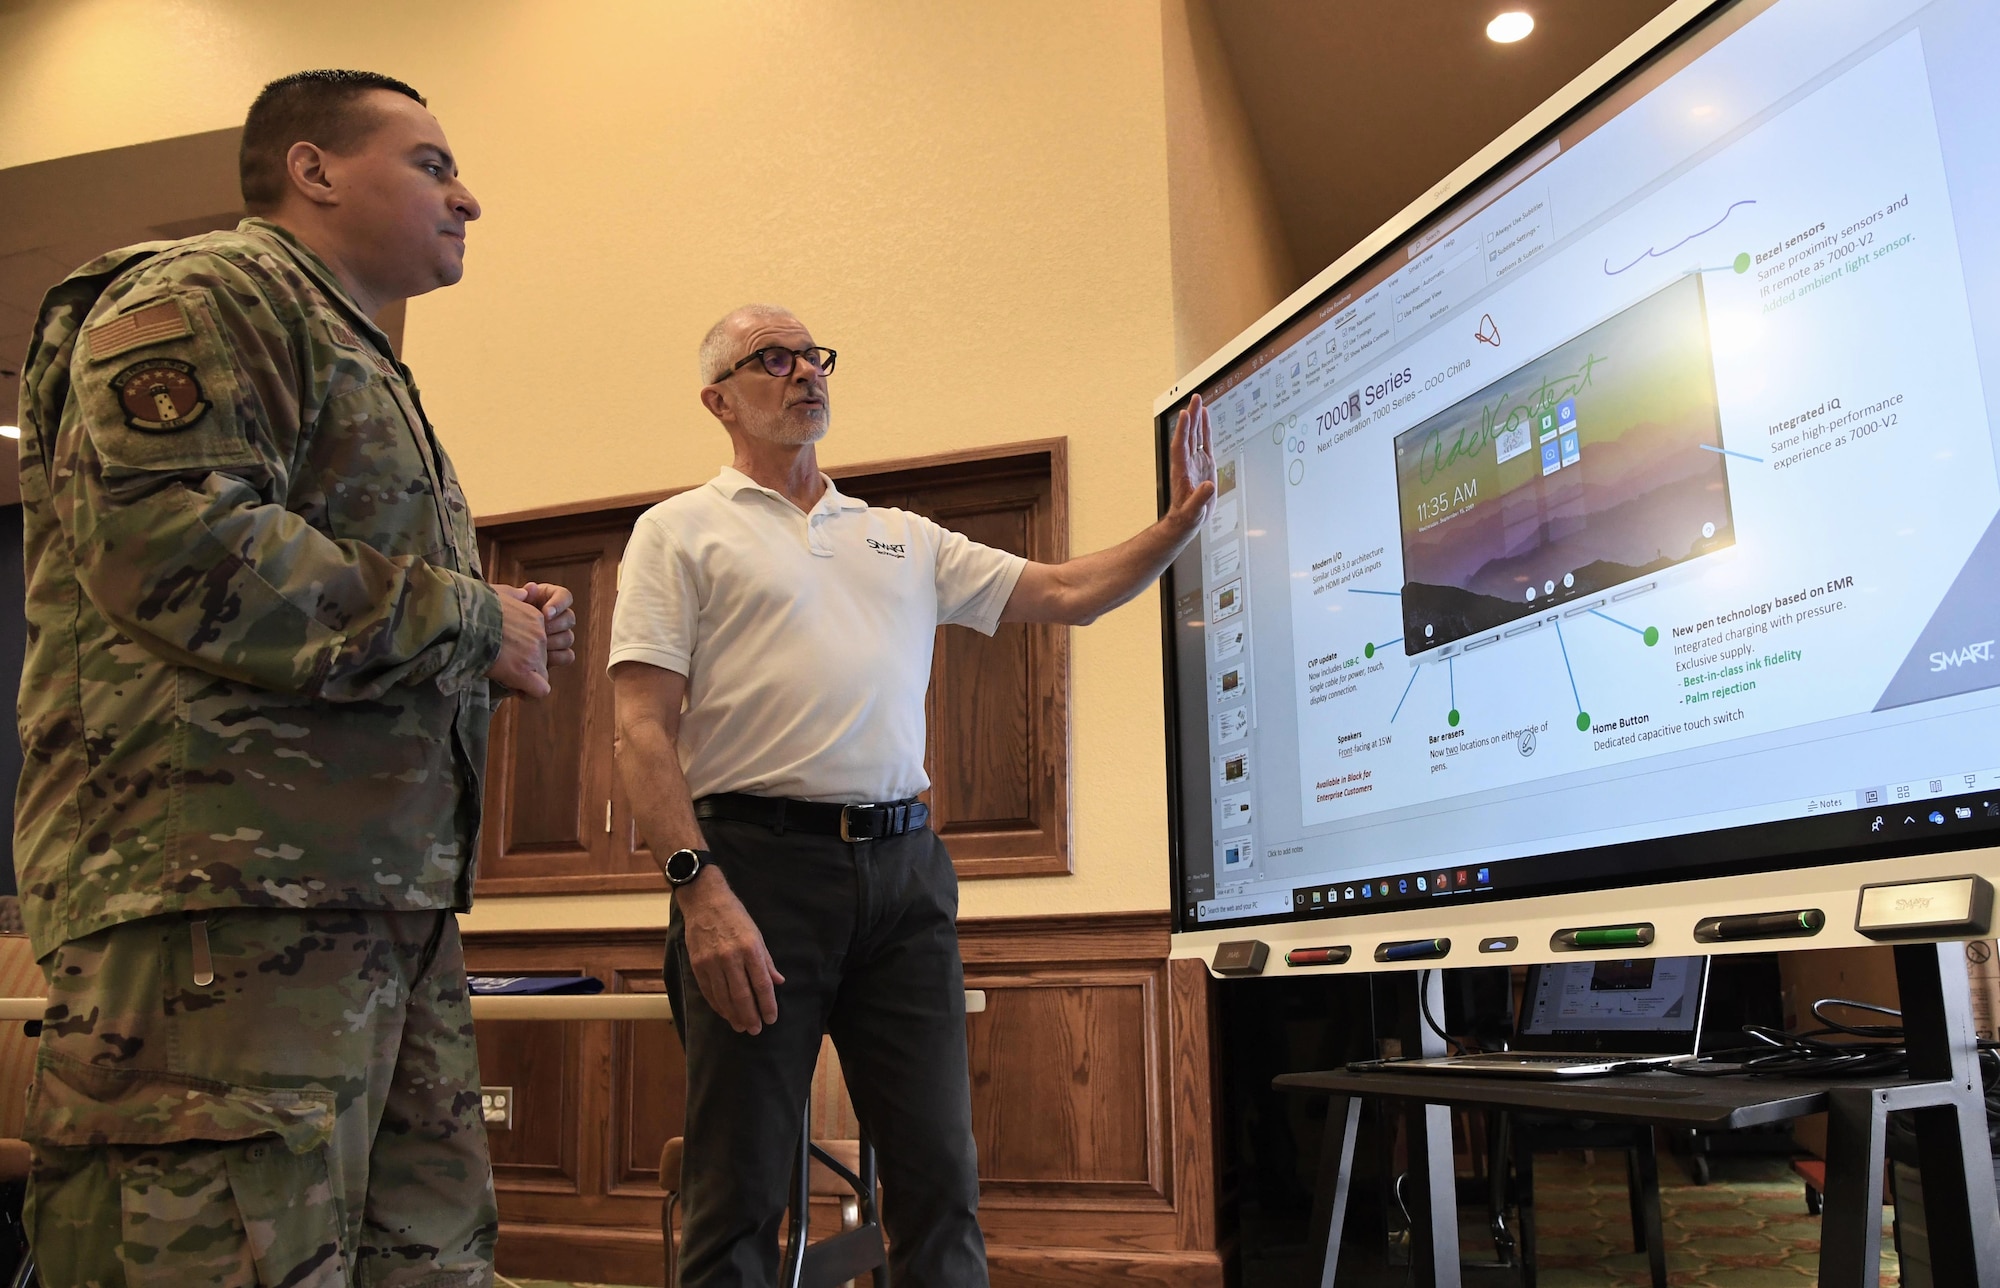 Gary Waliszewski, SMART Technologies federal systems group manager, explains the smart board training capabilities to U.S. Air Force Lt. Col. Nelson Caraballo, 85th Engineering Installation Squadron commander, during the Annual Keesler Air Force Base Tech Expo inside the Bay Breeze Event Center at Keesler Air Force Base, Mississippi, Feb. 11, 2020. The expo, hosted by the 81st Communications Squadron, was held to introduce military members to the latest in technological advancements to bolster the Air Force�s capabilities in national defense. (U.S. Air Force photo by Kemberly Groue)